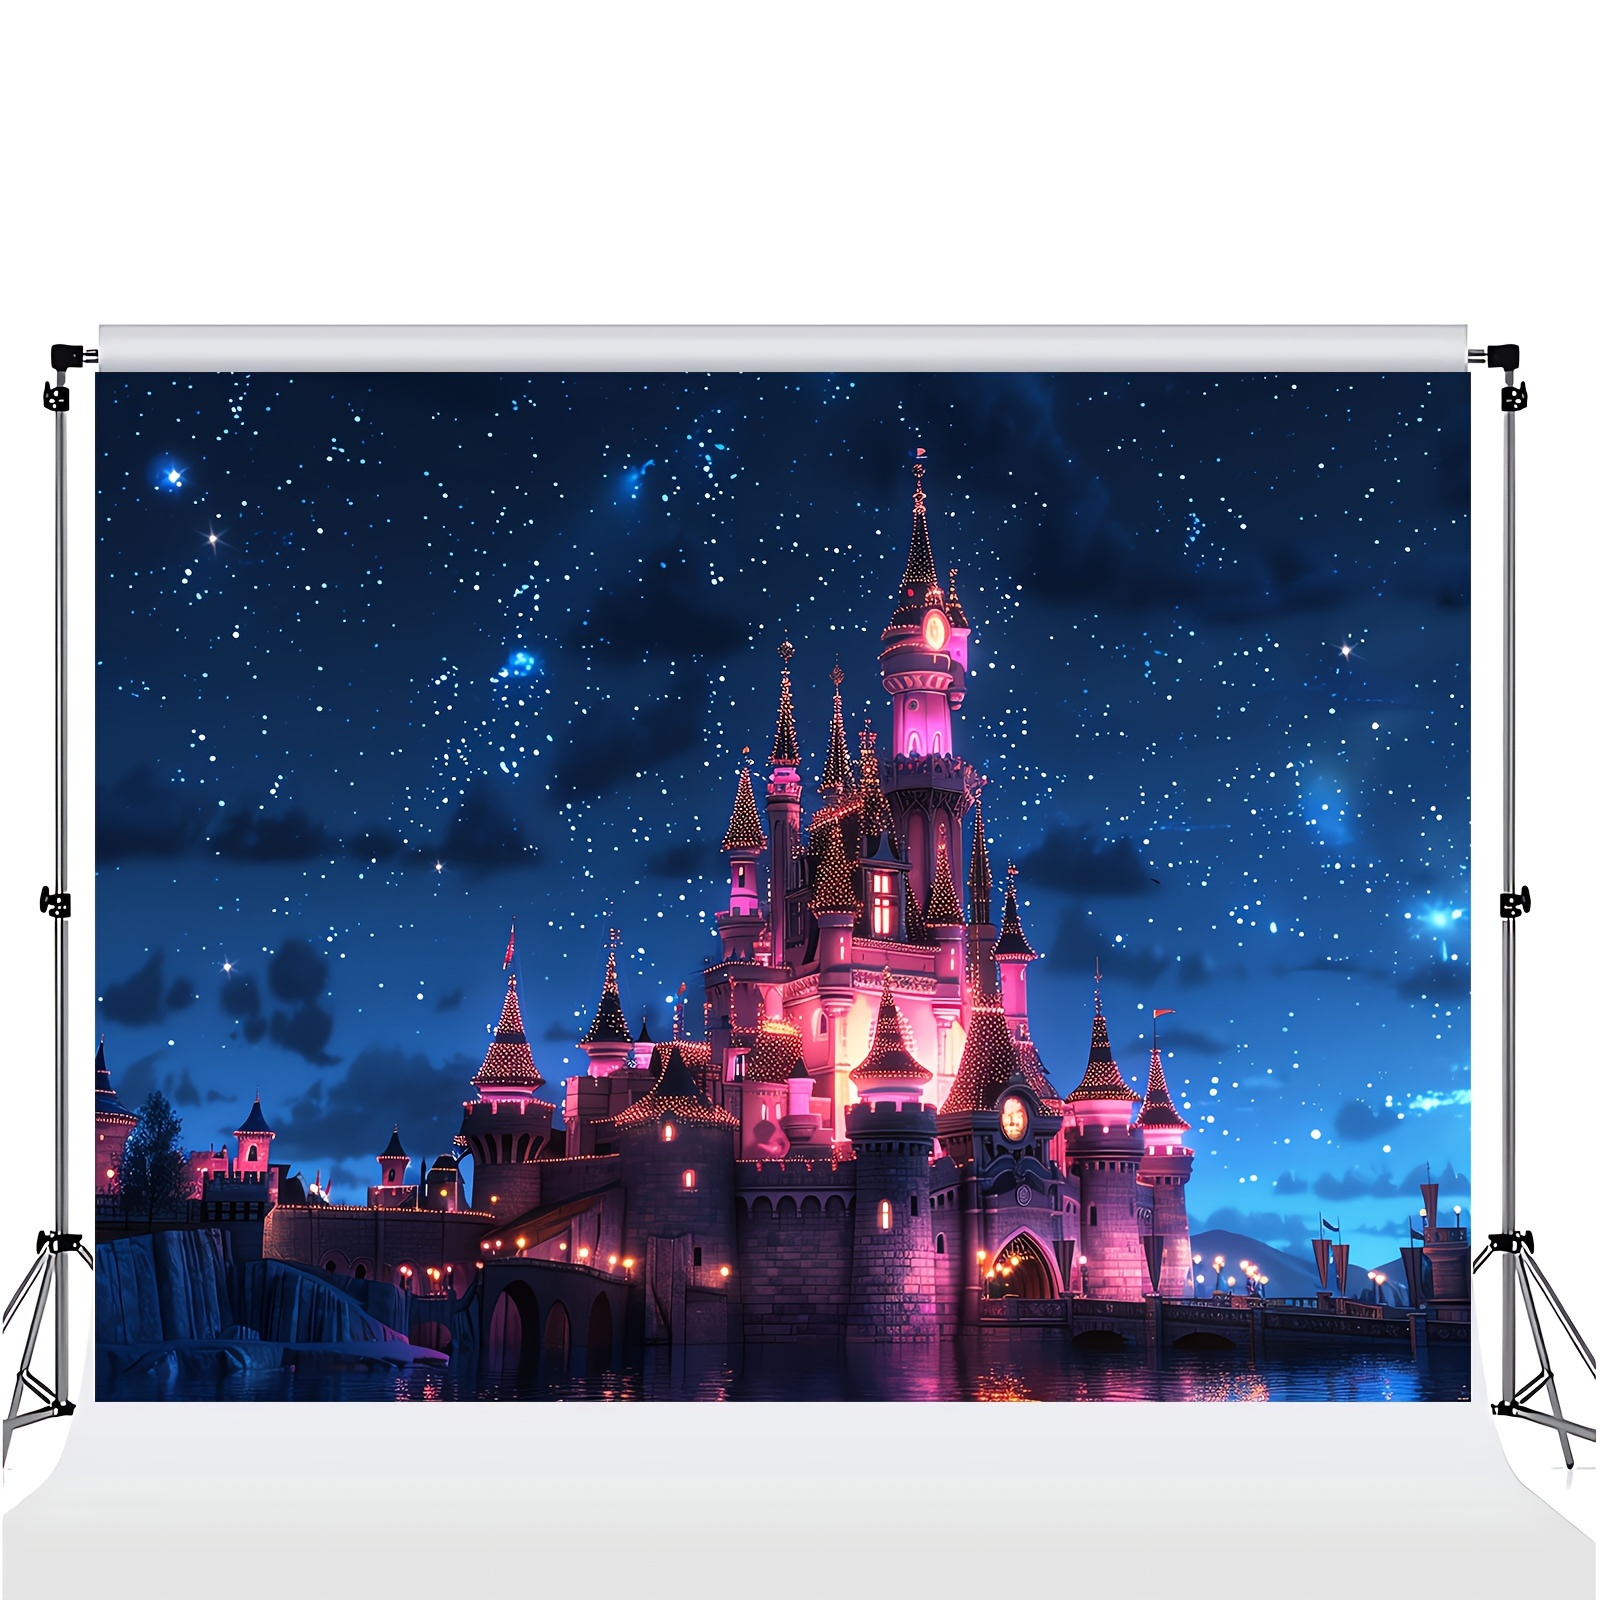 1pc 51 59inch 70 8 90 5inch photography backdrop castle backdrop beautiful castle night view photography background birthday party photo video shooting props